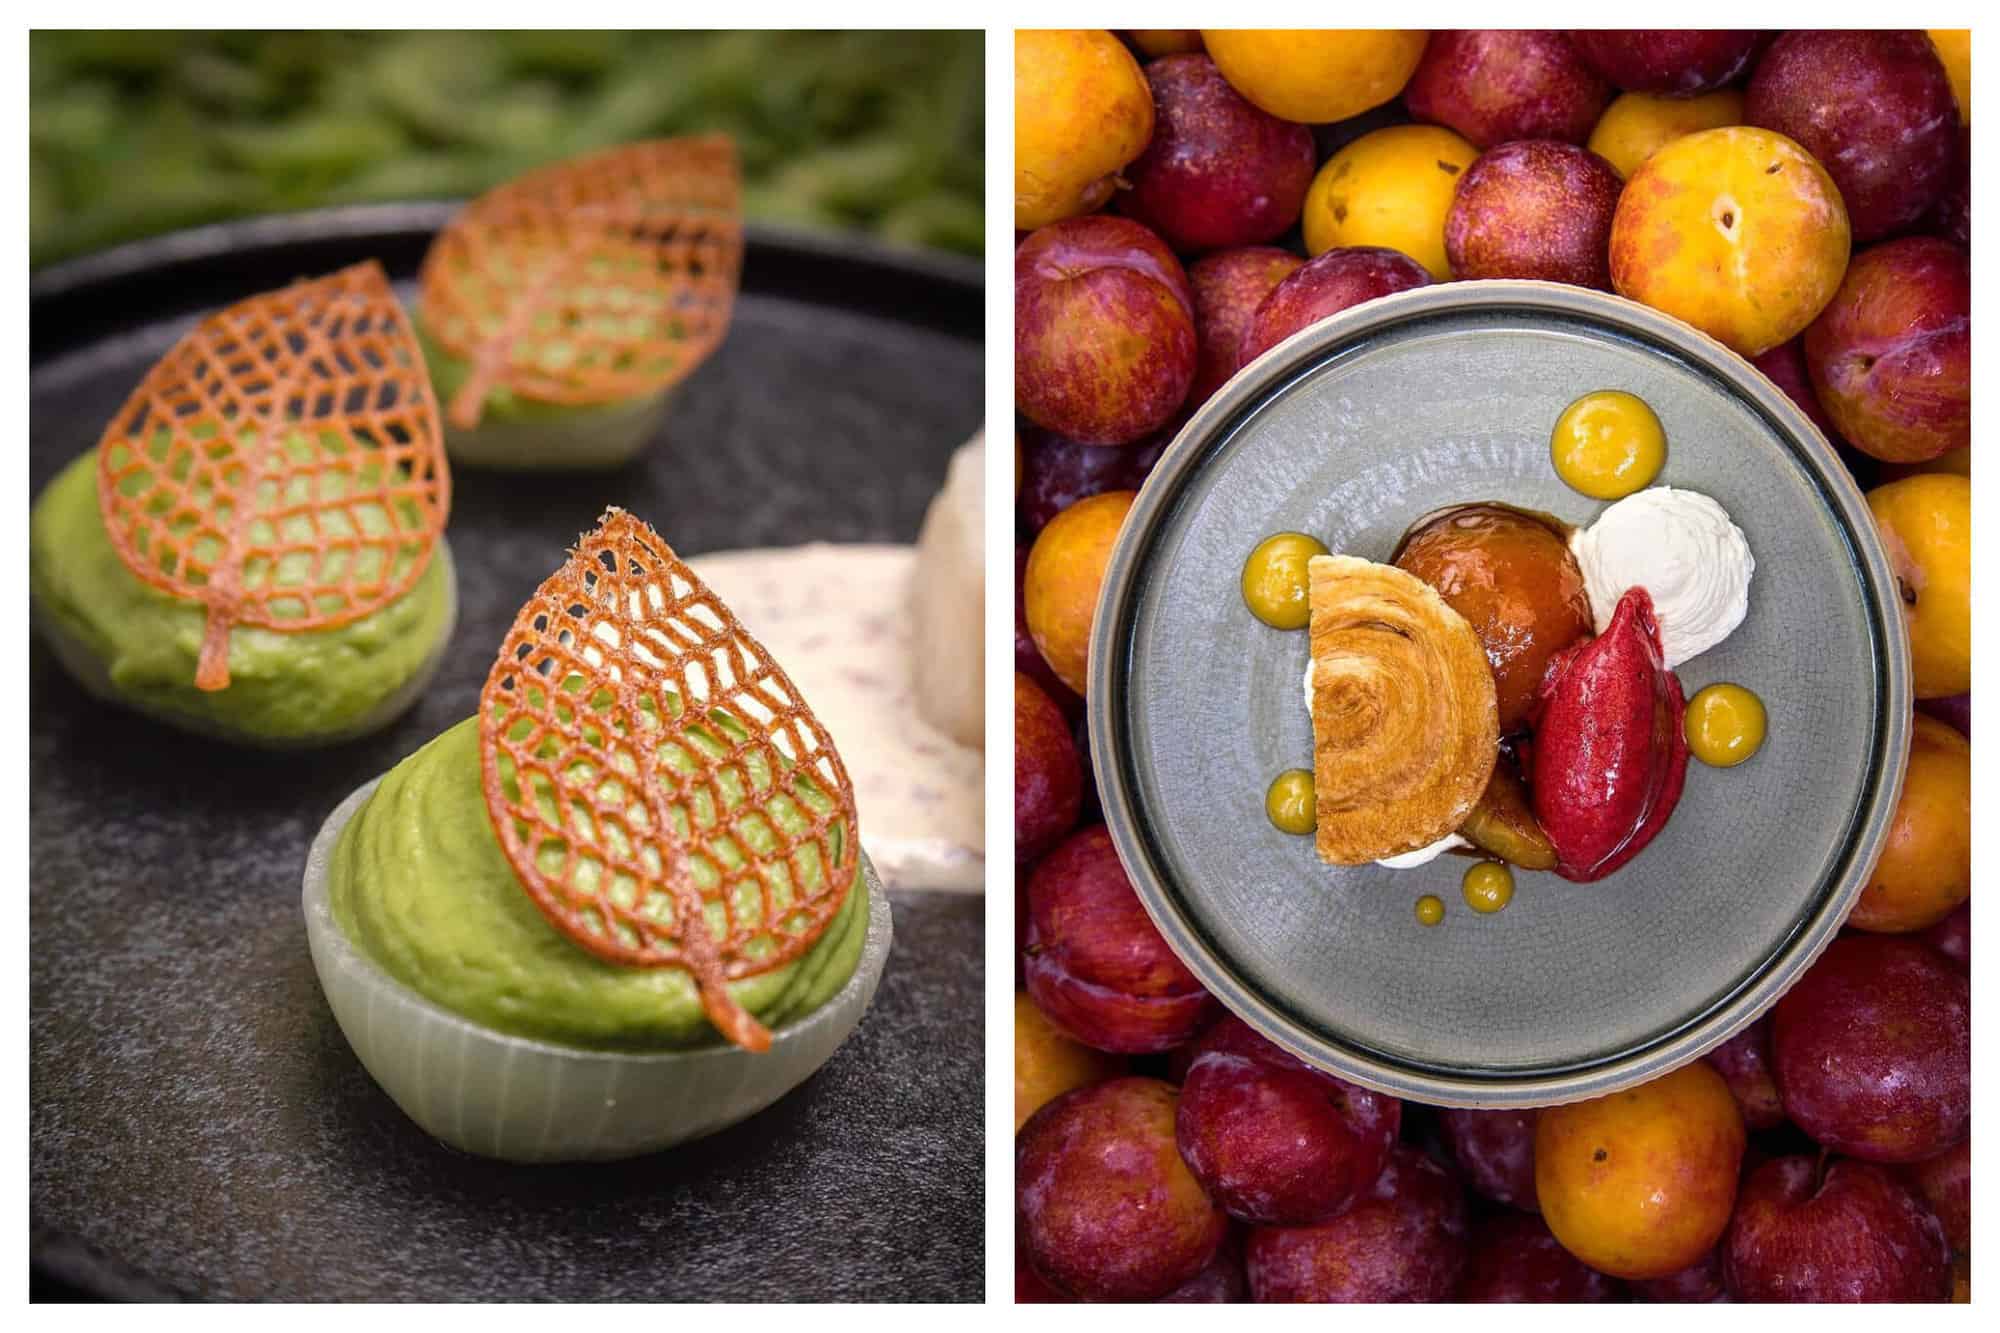 Green purée with decorative leaf and peach dessert 